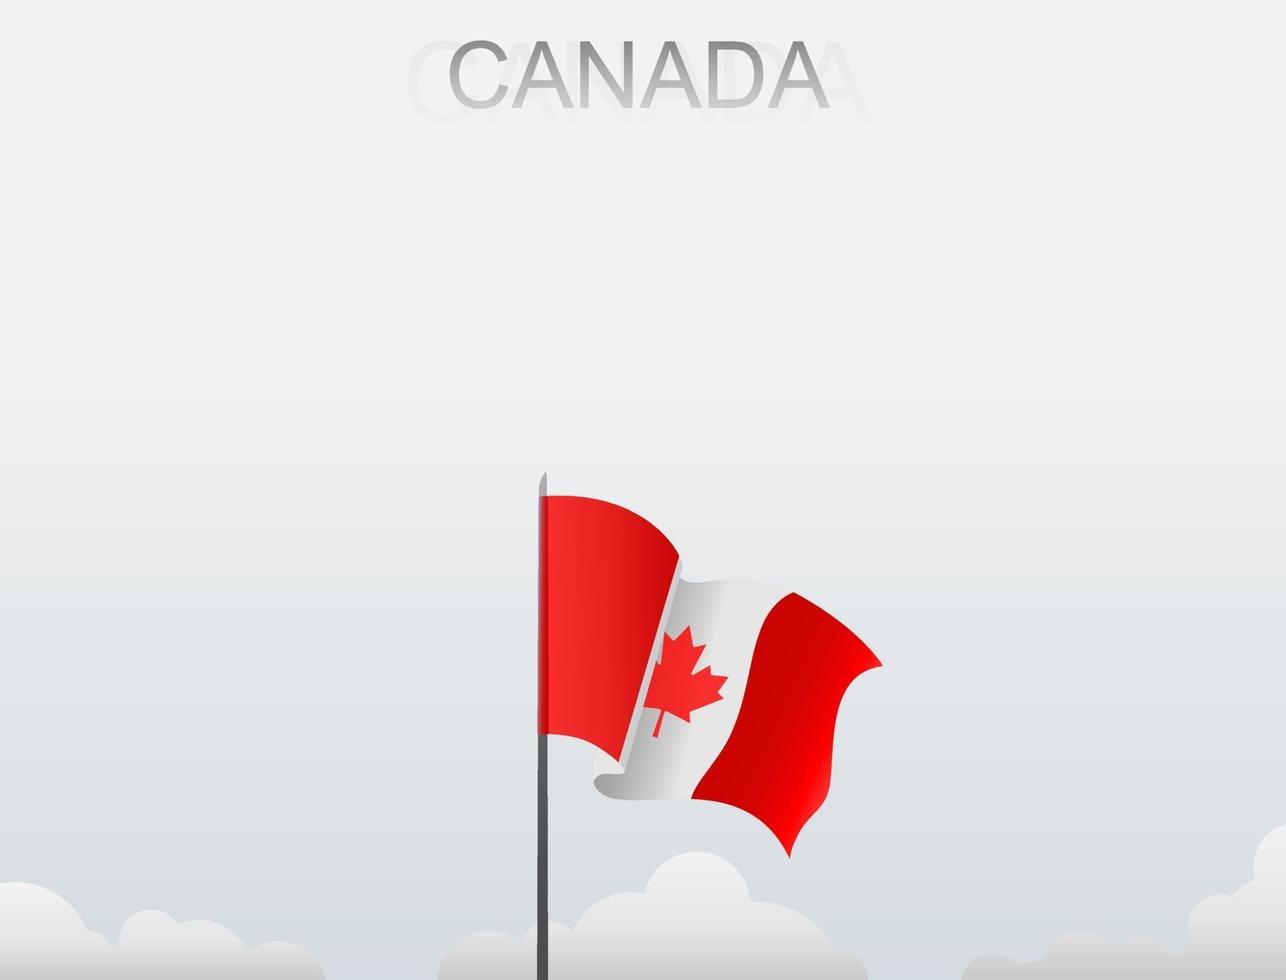 The Canada flag is flying on a pole that stands tall under the white sky vector